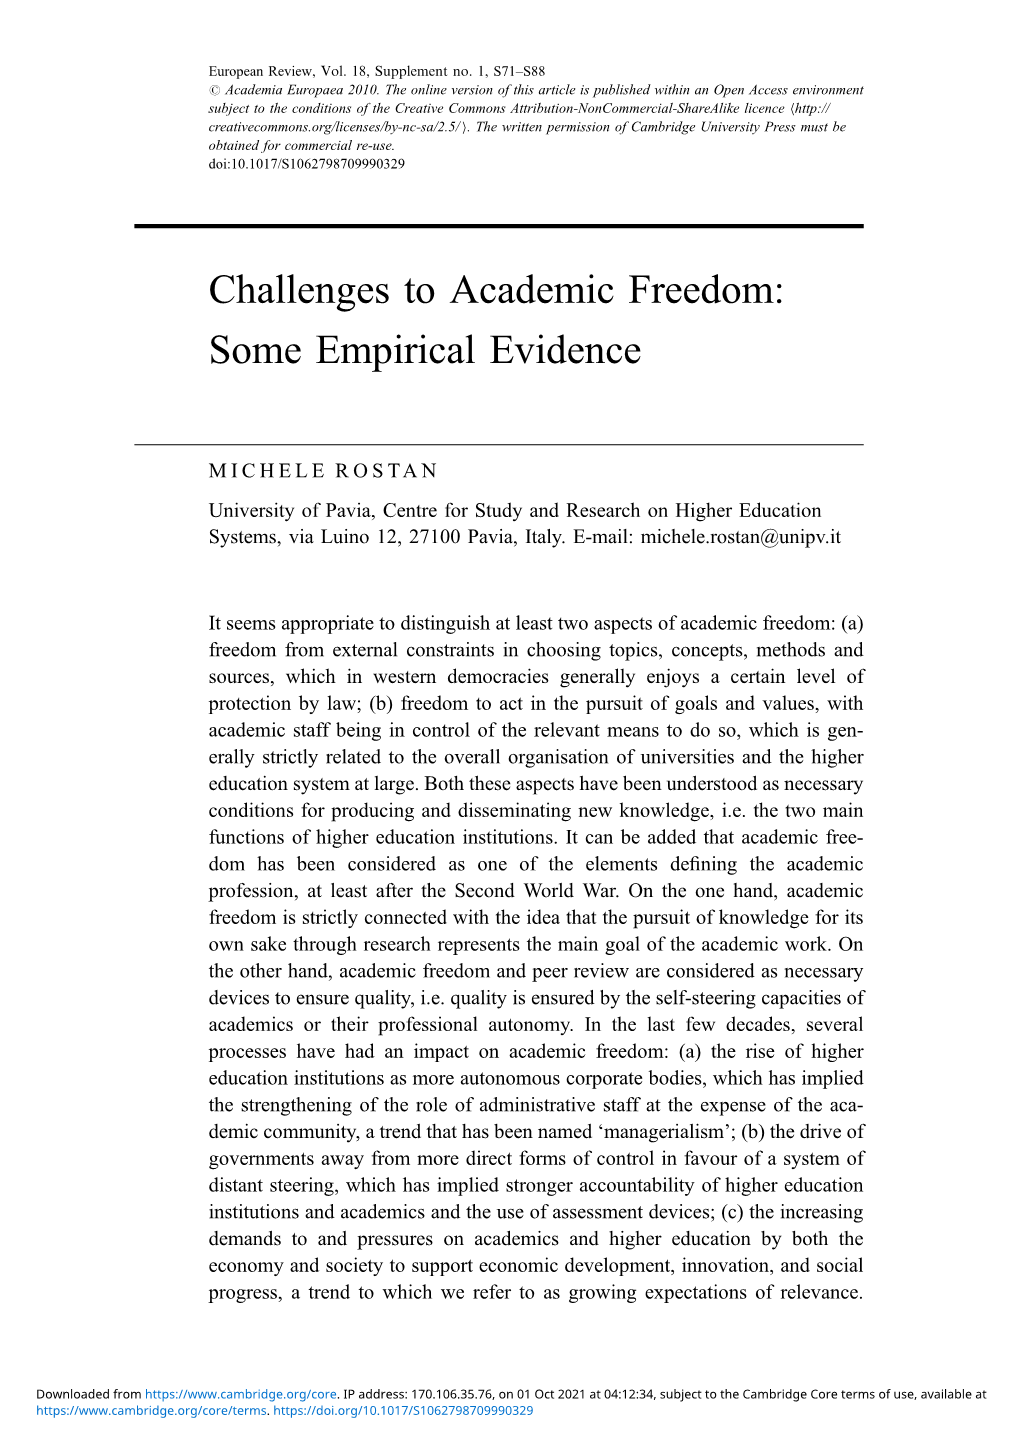 Challenges to Academic Freedom: Some Empirical Evidence